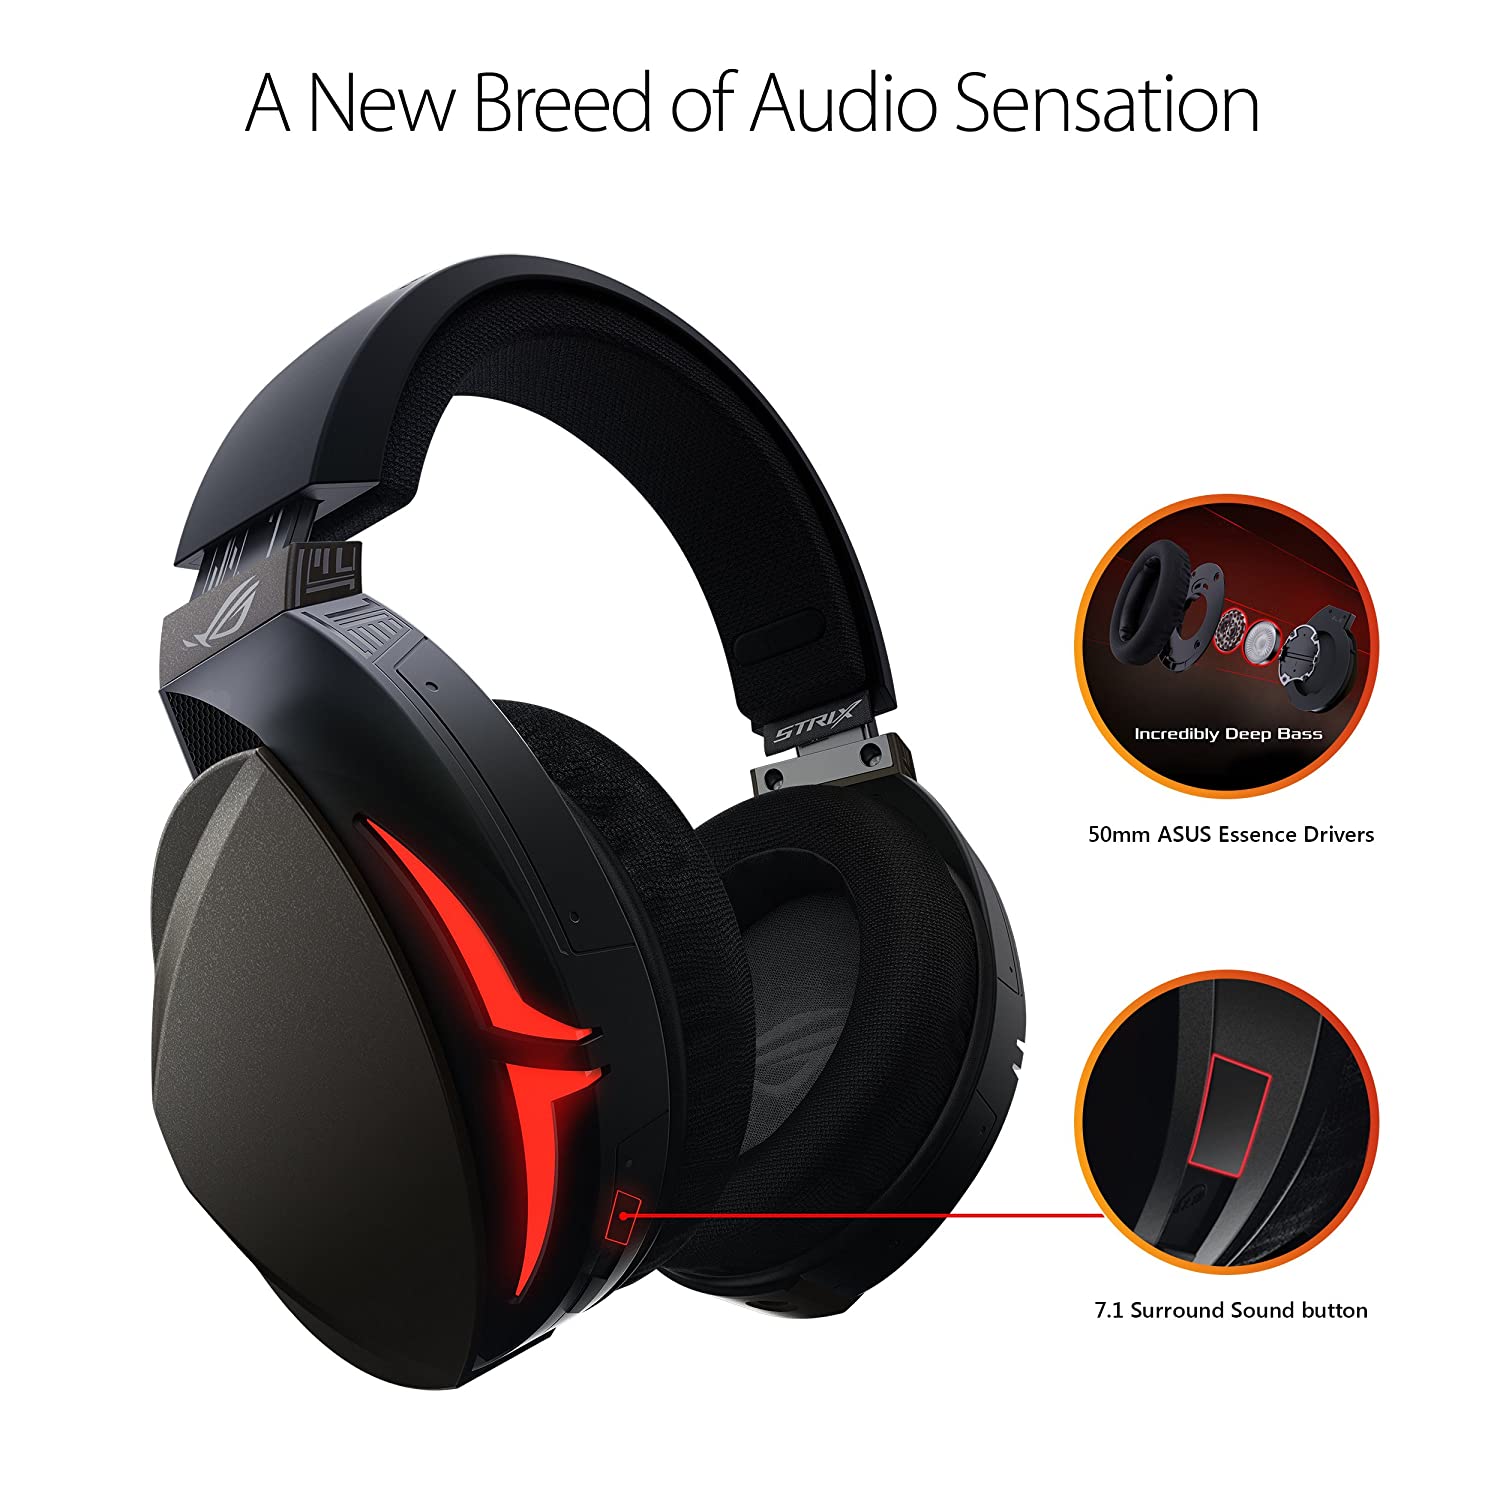 Asus ROG Strix Fusion 300 7.1 gaming headset delivers immersive gaming audio and is compatible with PC, PS4, Xbox One and mobile devices